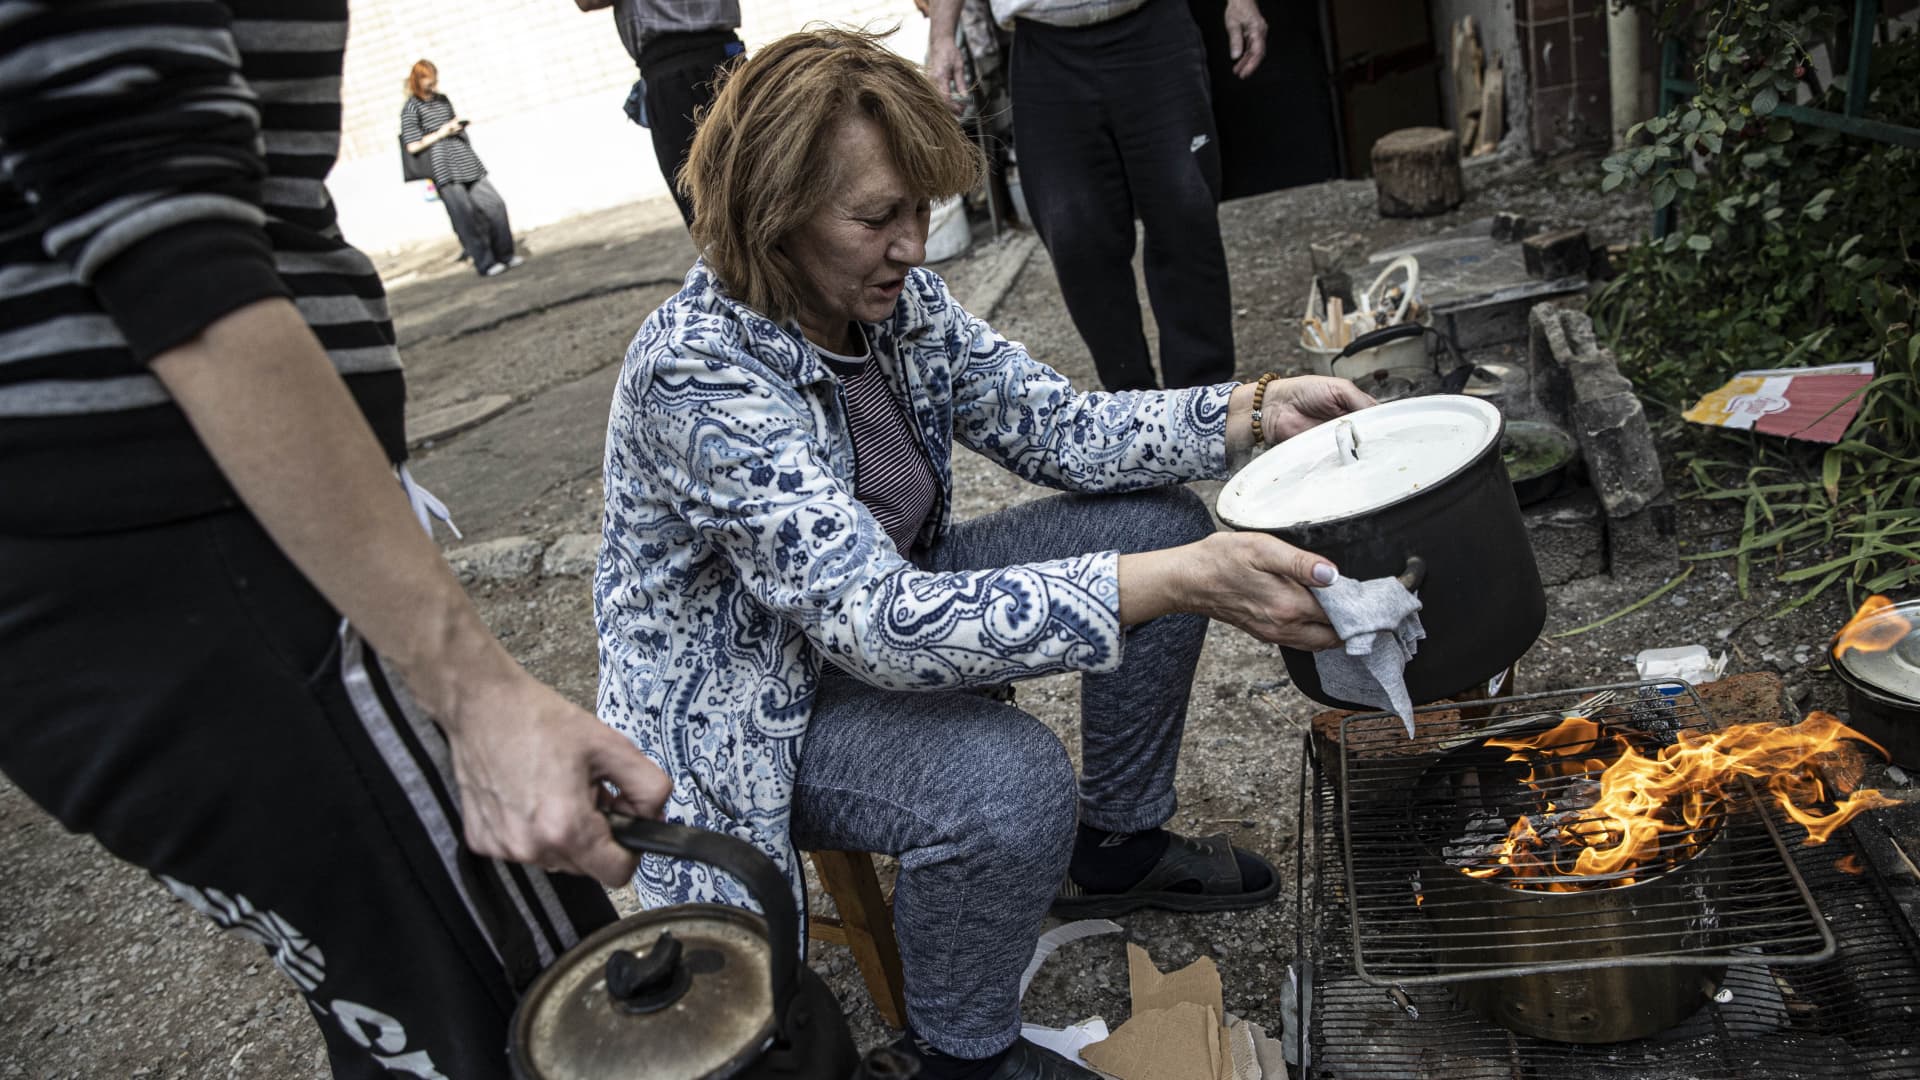 Ukrainians cook their meal on a wood fire outside their homes after Russian Forces withdrawal from Izium as Russia-Ukraine war continues in Izium, Kharkiv Oblast, Ukraine on September 18, 2022.